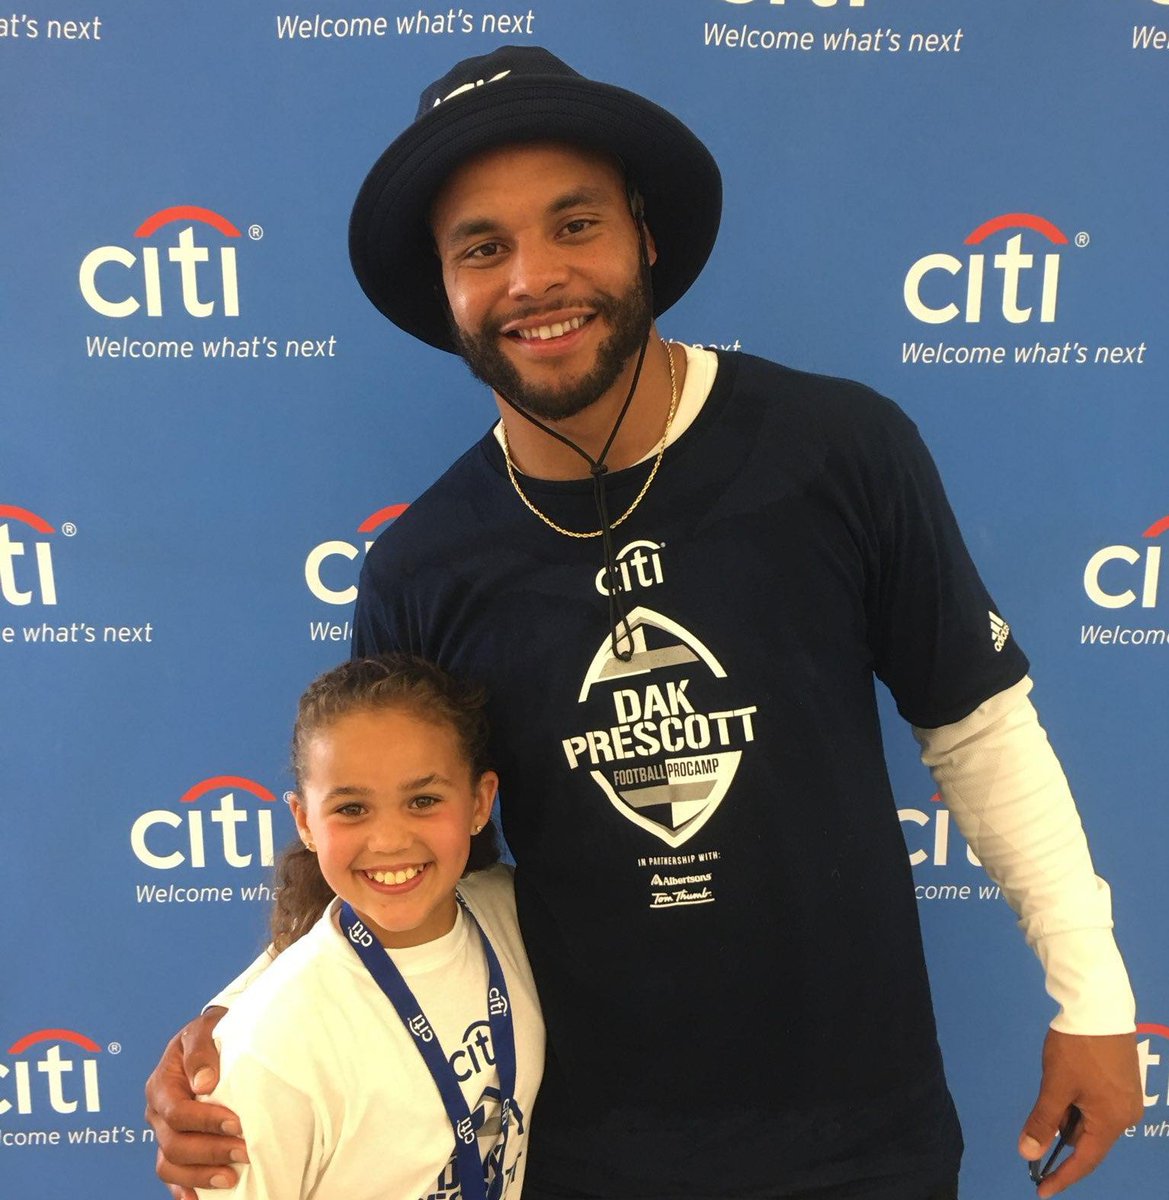 Thanks to @CitiBank for supporting my Football ProCamp! #CloserToPro